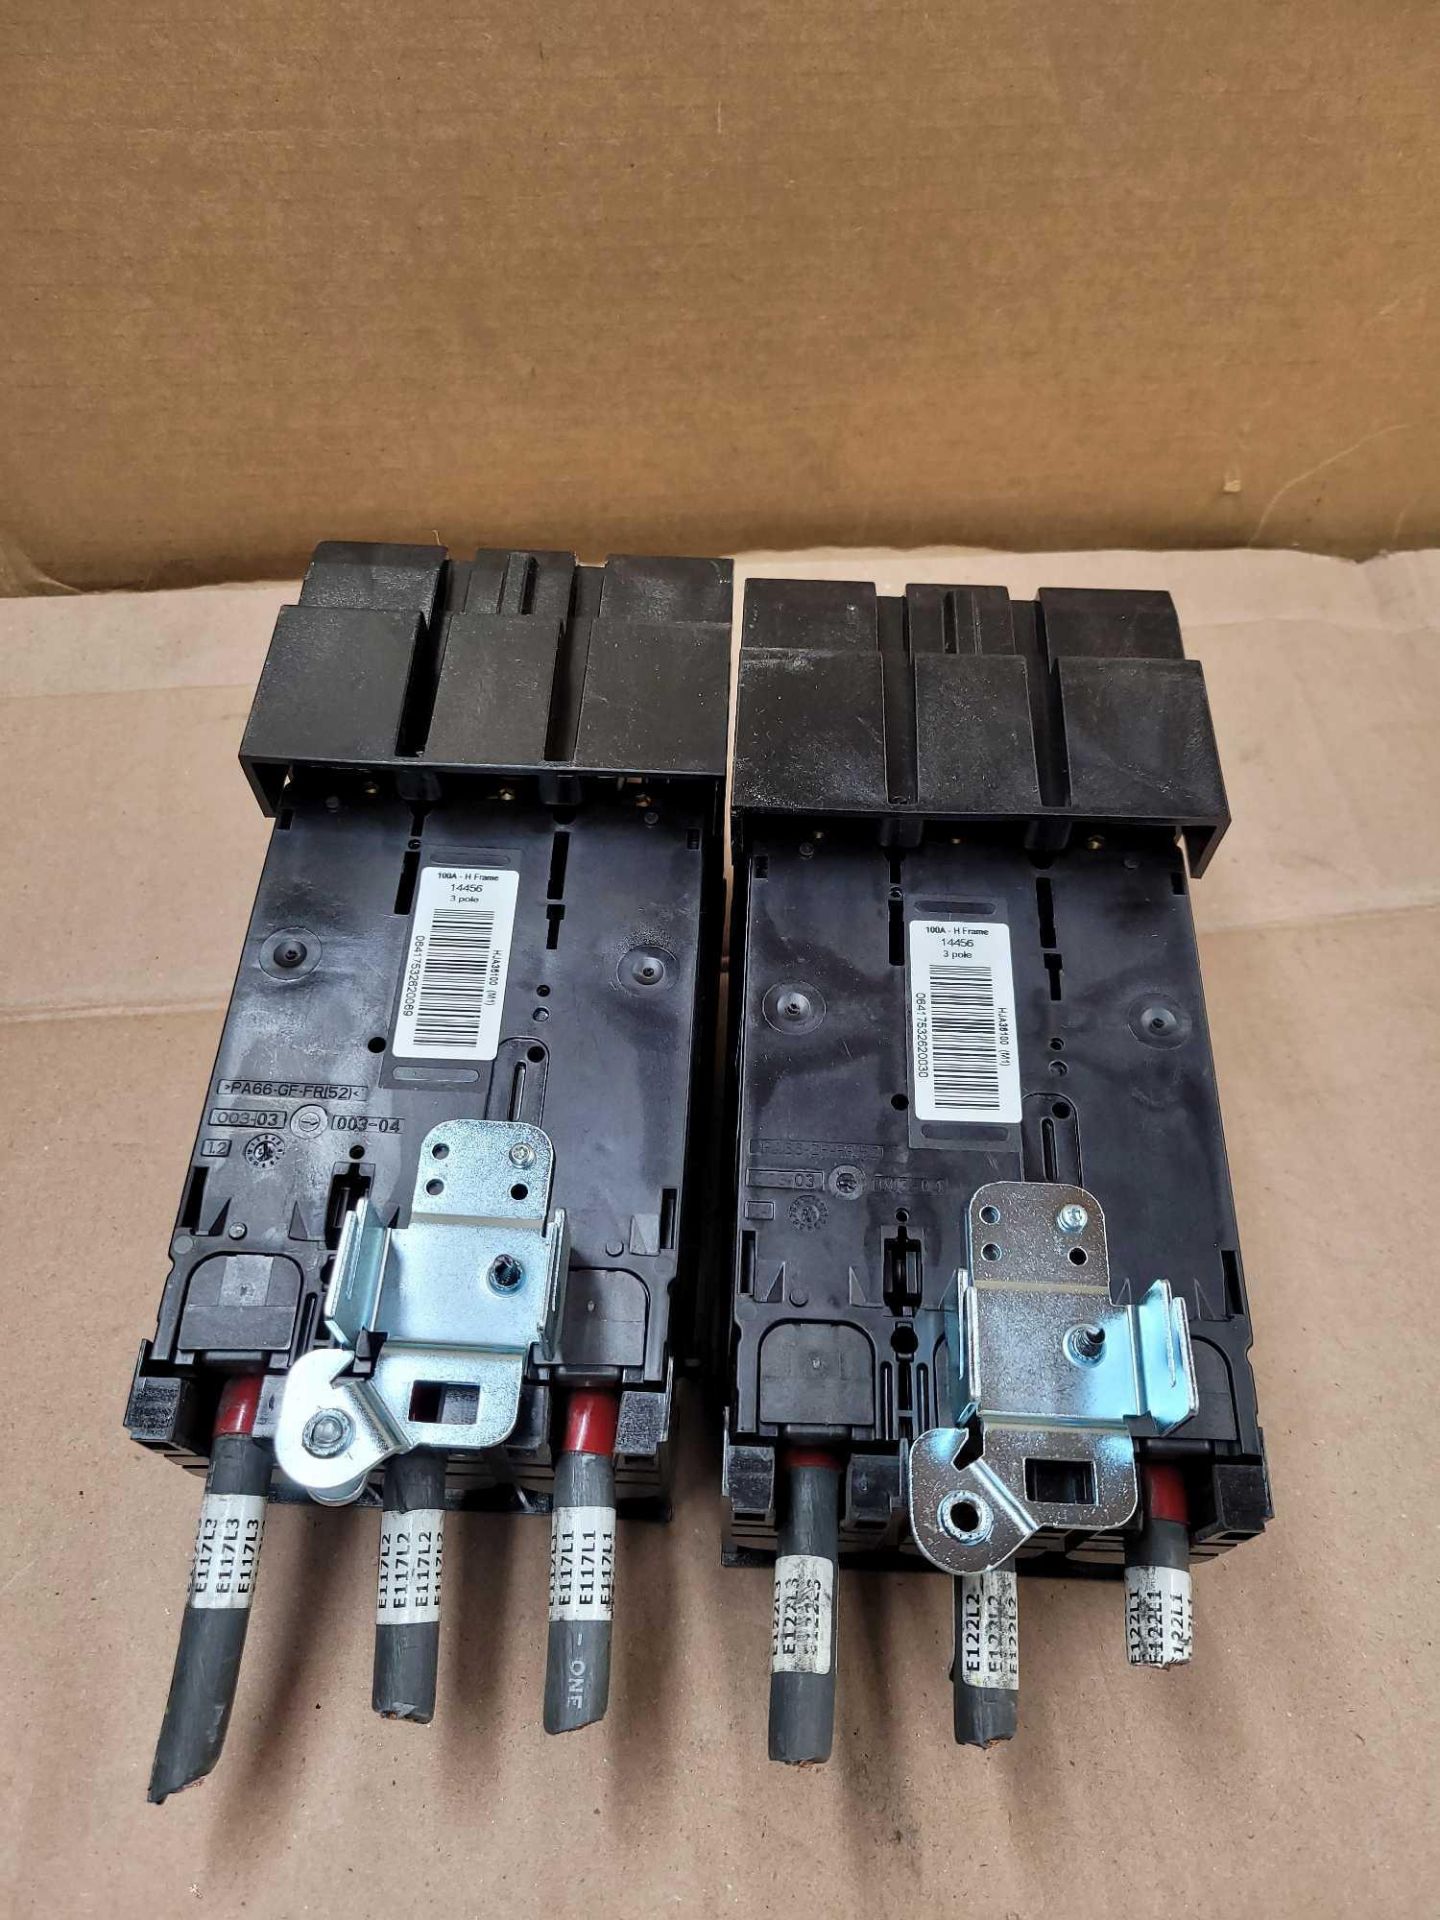 LOT OF 2 SQUARE D HJA36100 / 100 Amp Molded Case Circuit Breaker  /  Lot Weight: 9.6 lbs - Image 4 of 6